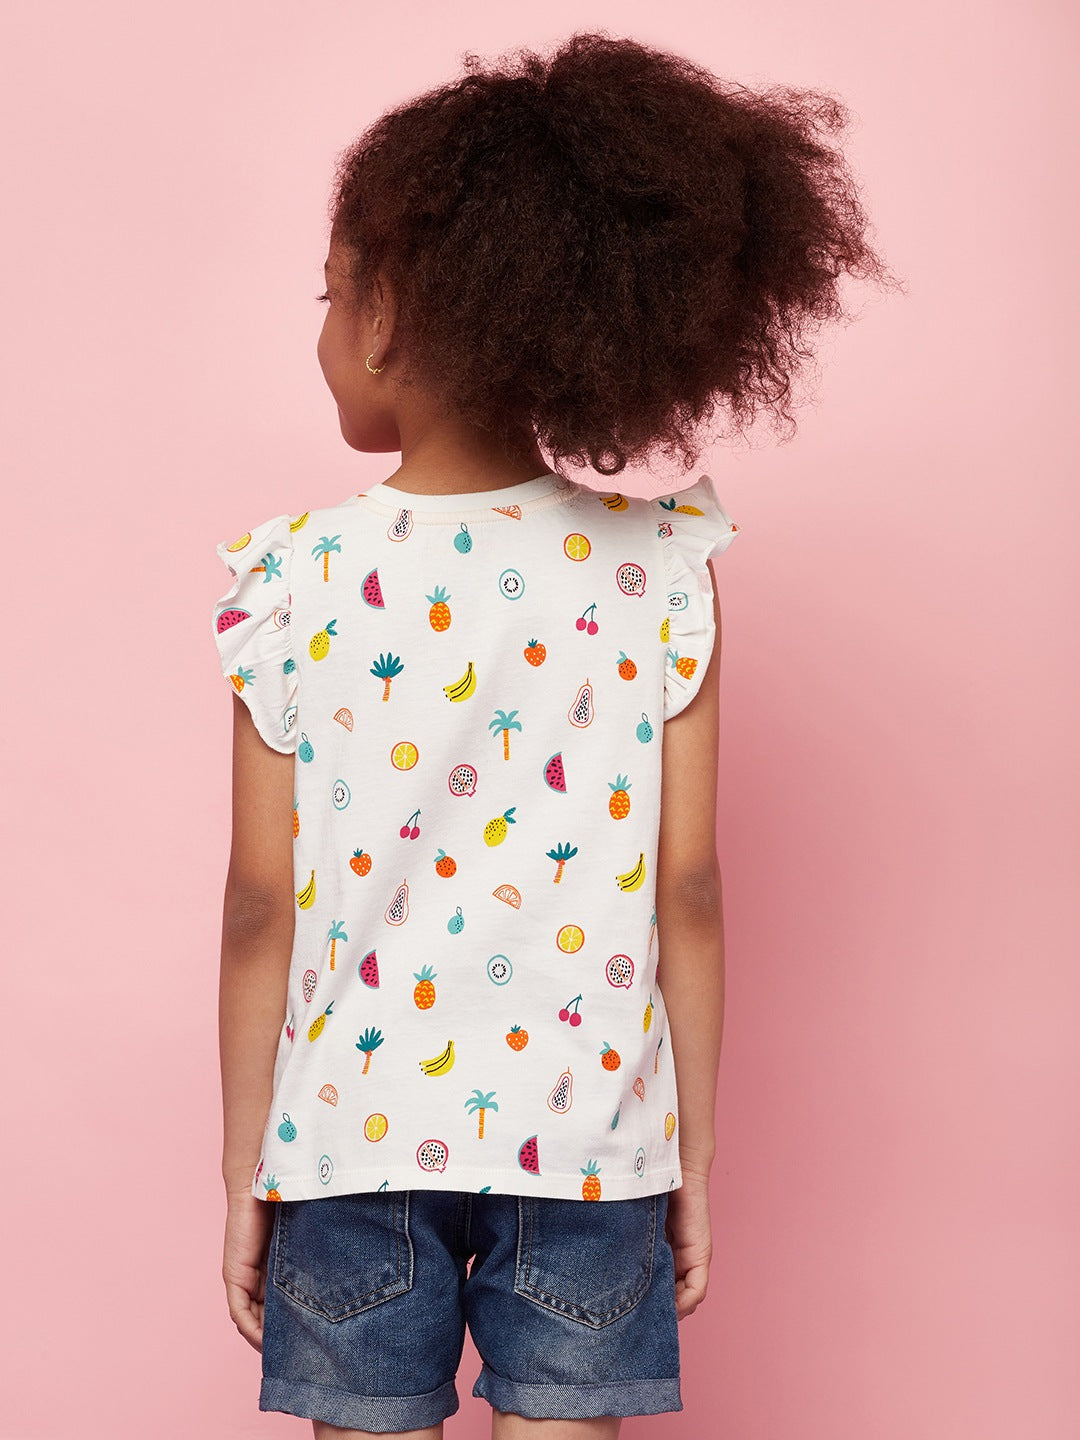 Printed Fruit Top For Girls